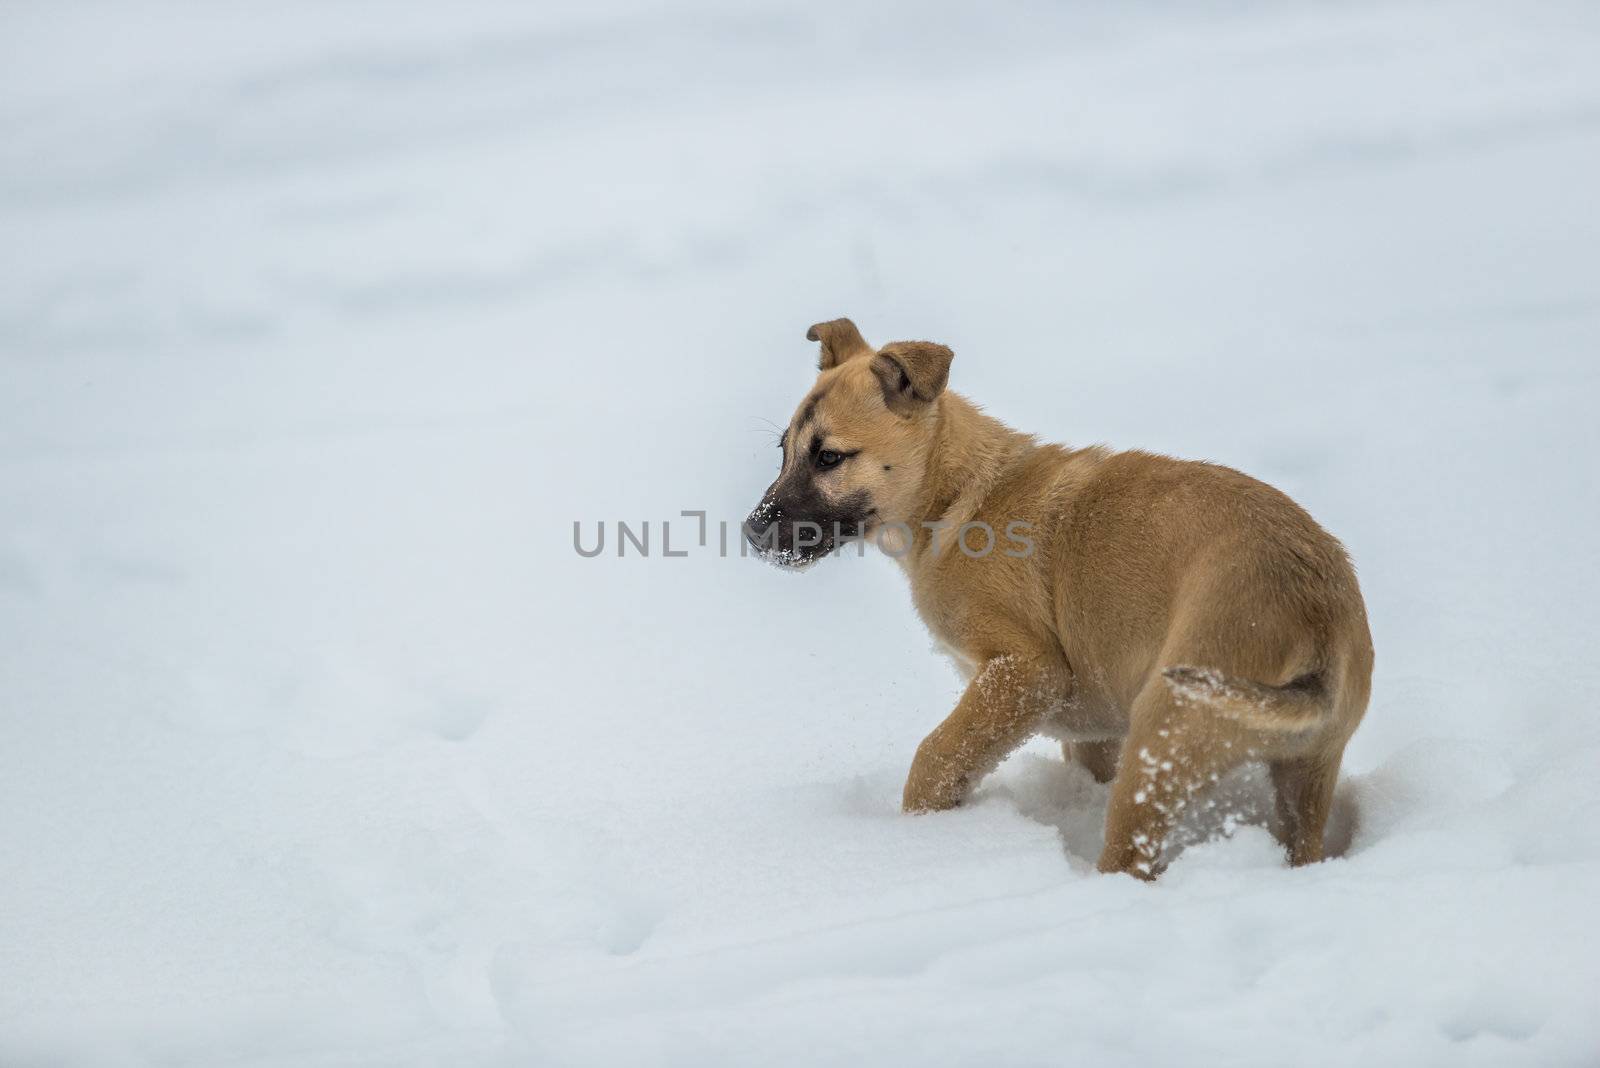 A cute little dog puppy freezing in snow in winter.